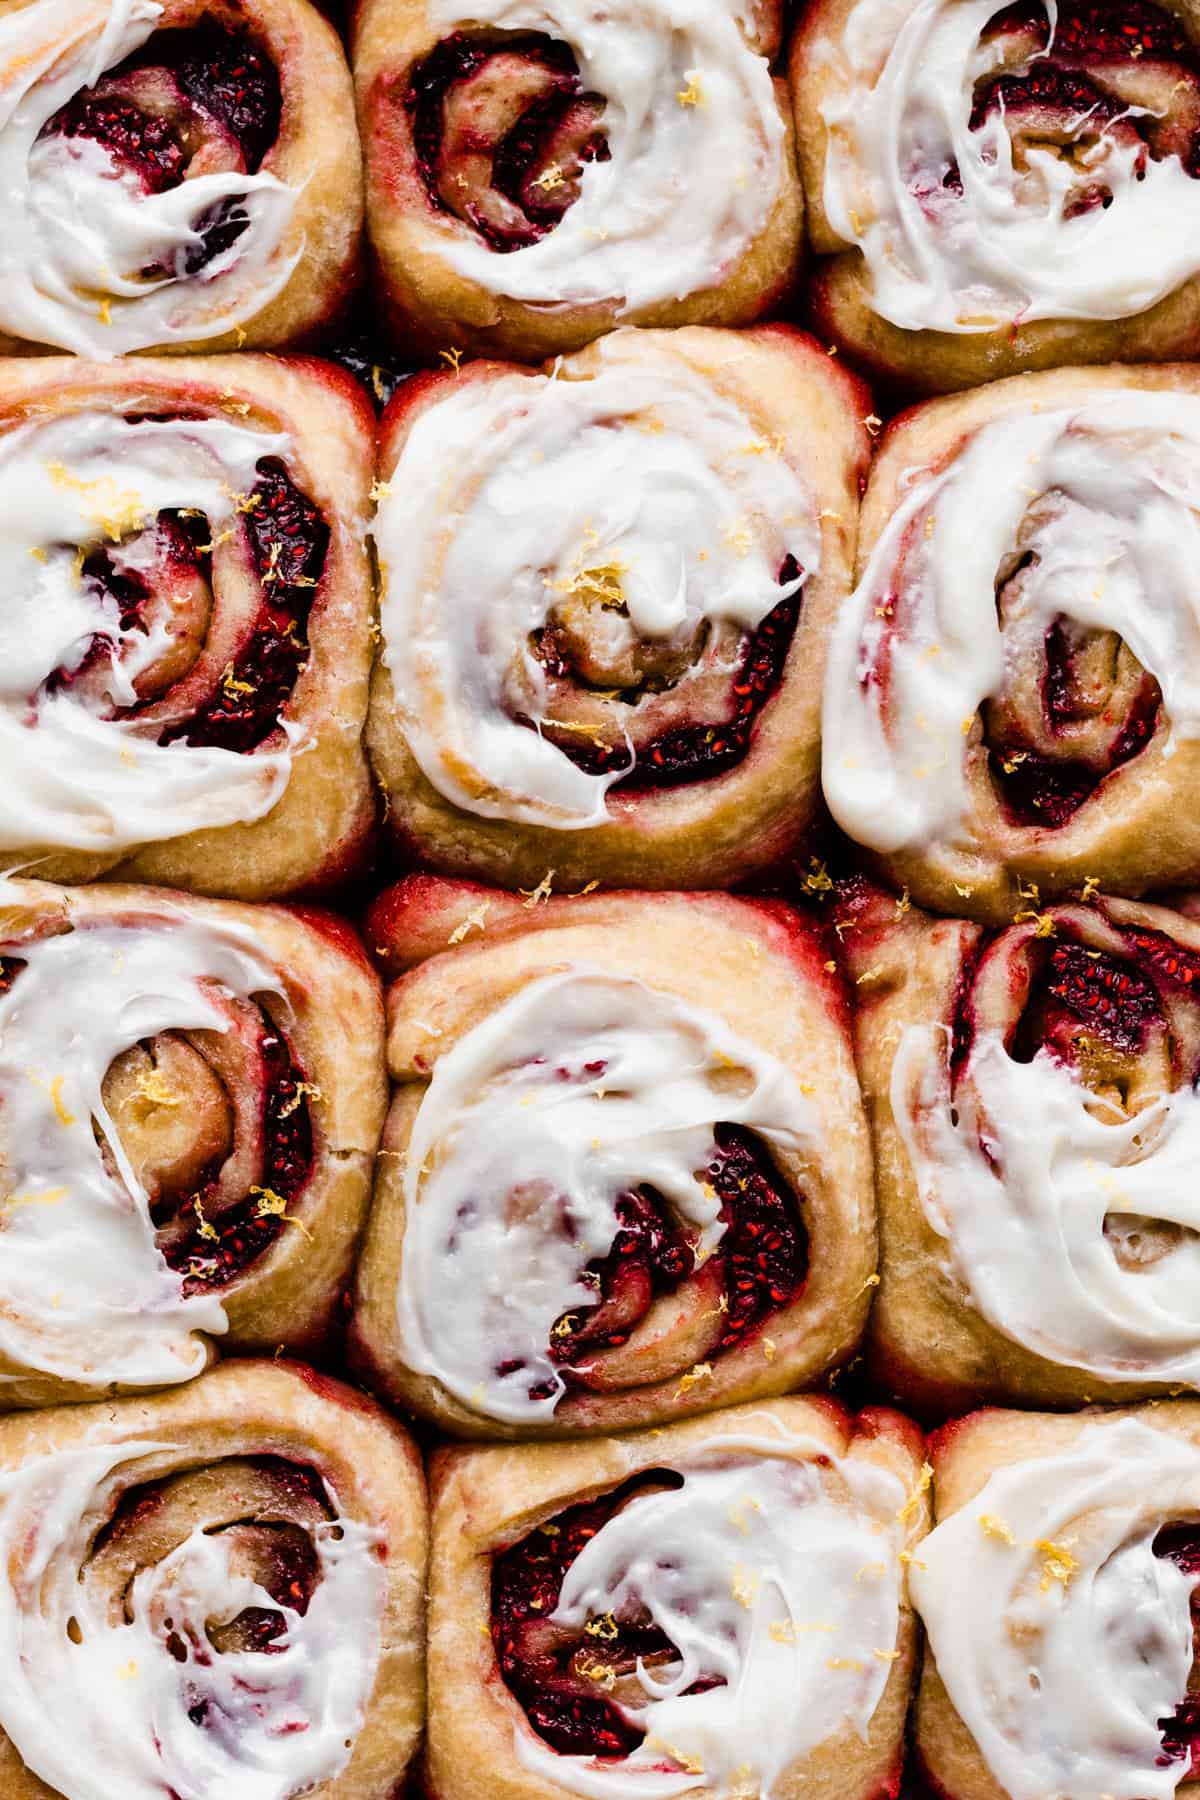 The baked, iced sweet rolls with jammy raspberry filling.